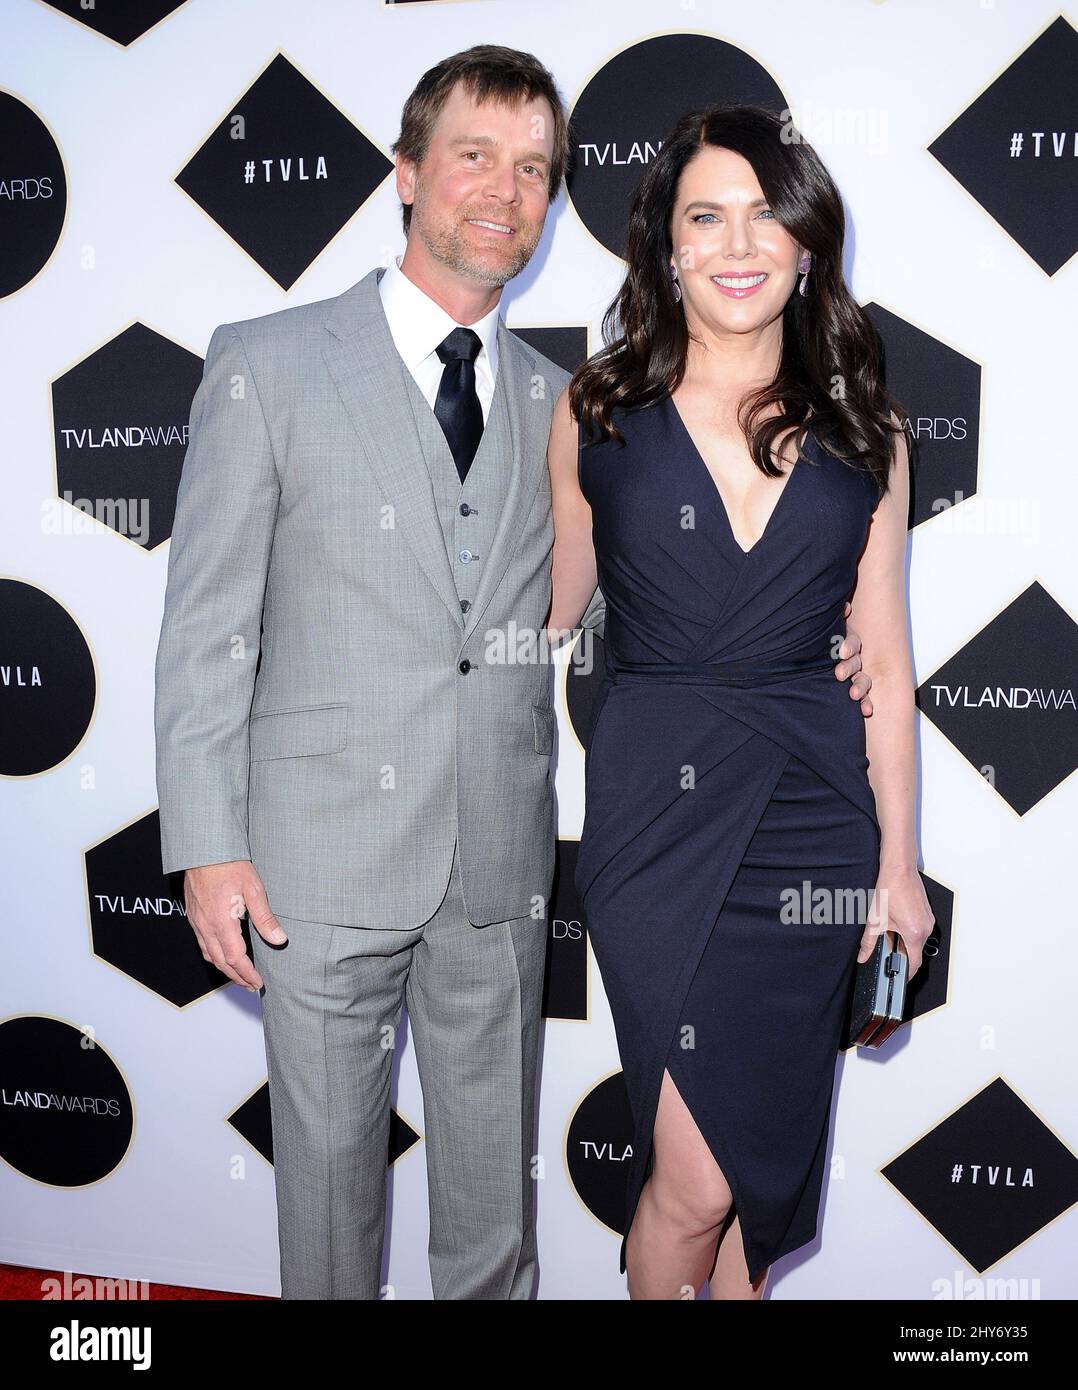 Peter Krause, Lauren Graham attending 2015 TV LAND Awards - Arrivals held at Saban Theatre in Los Angeles, USA. Stock Photo